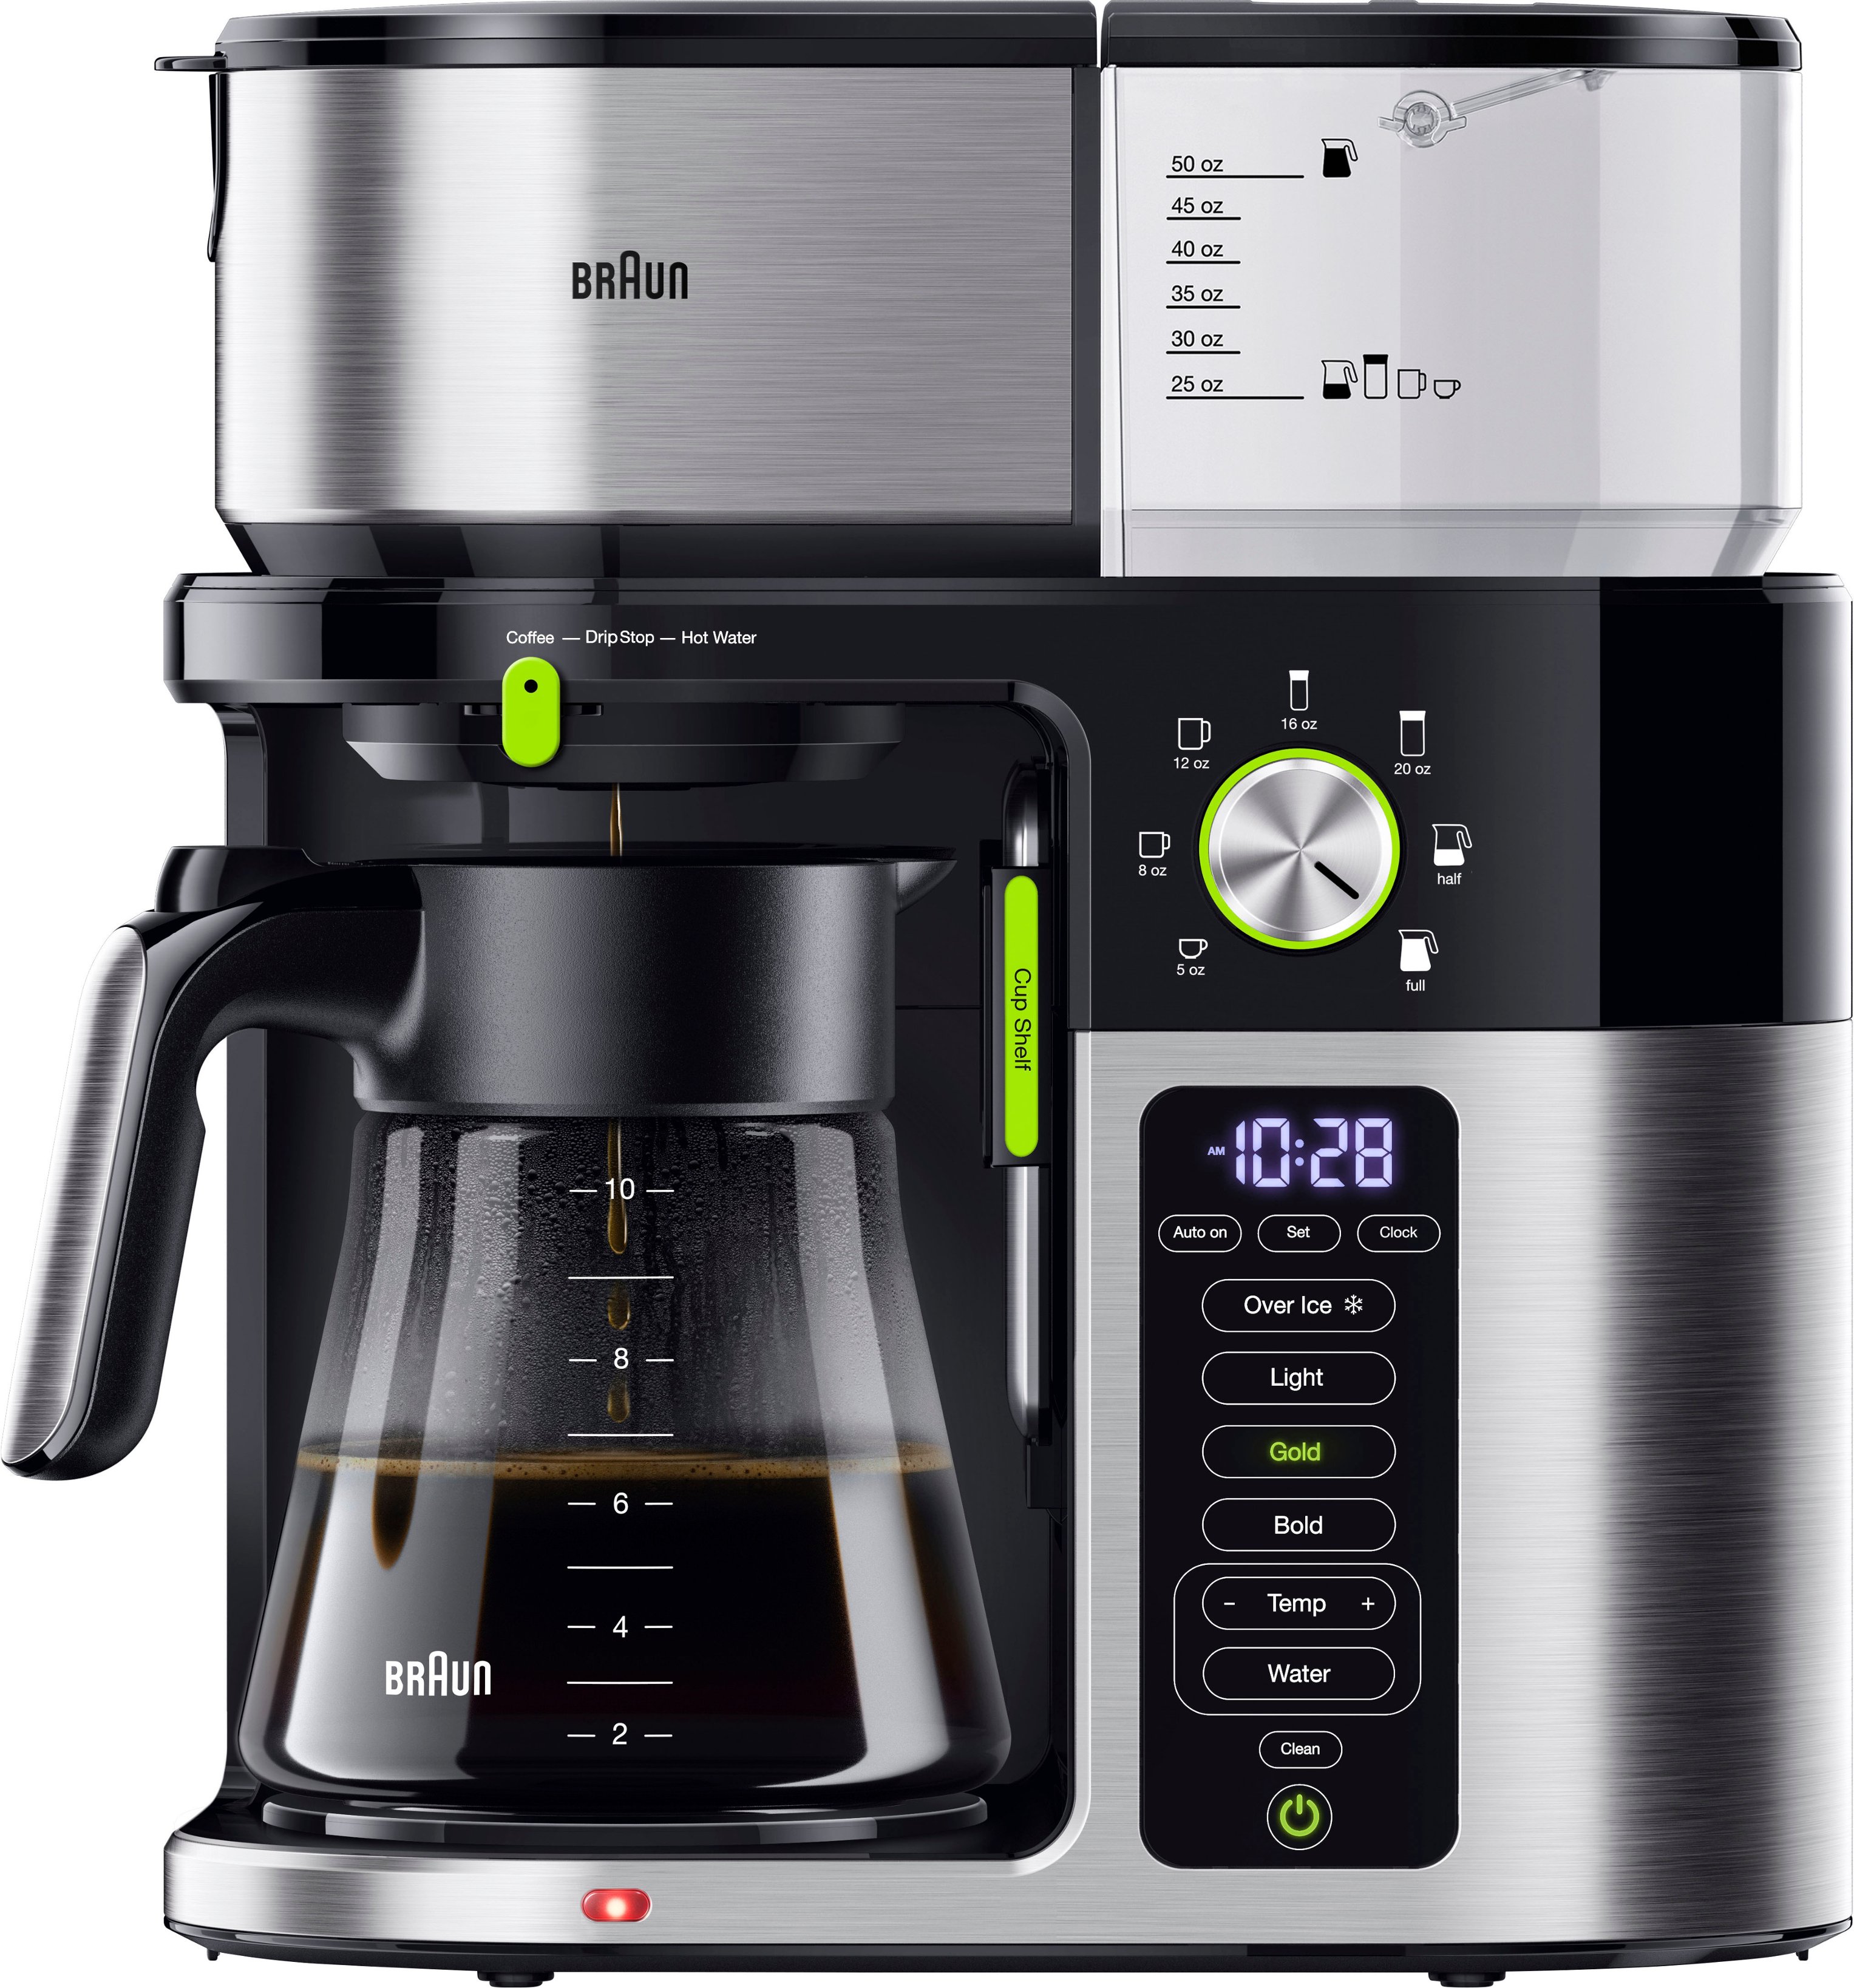 Braun MultiServe Coffee Machine Review: Finally, a Great Single